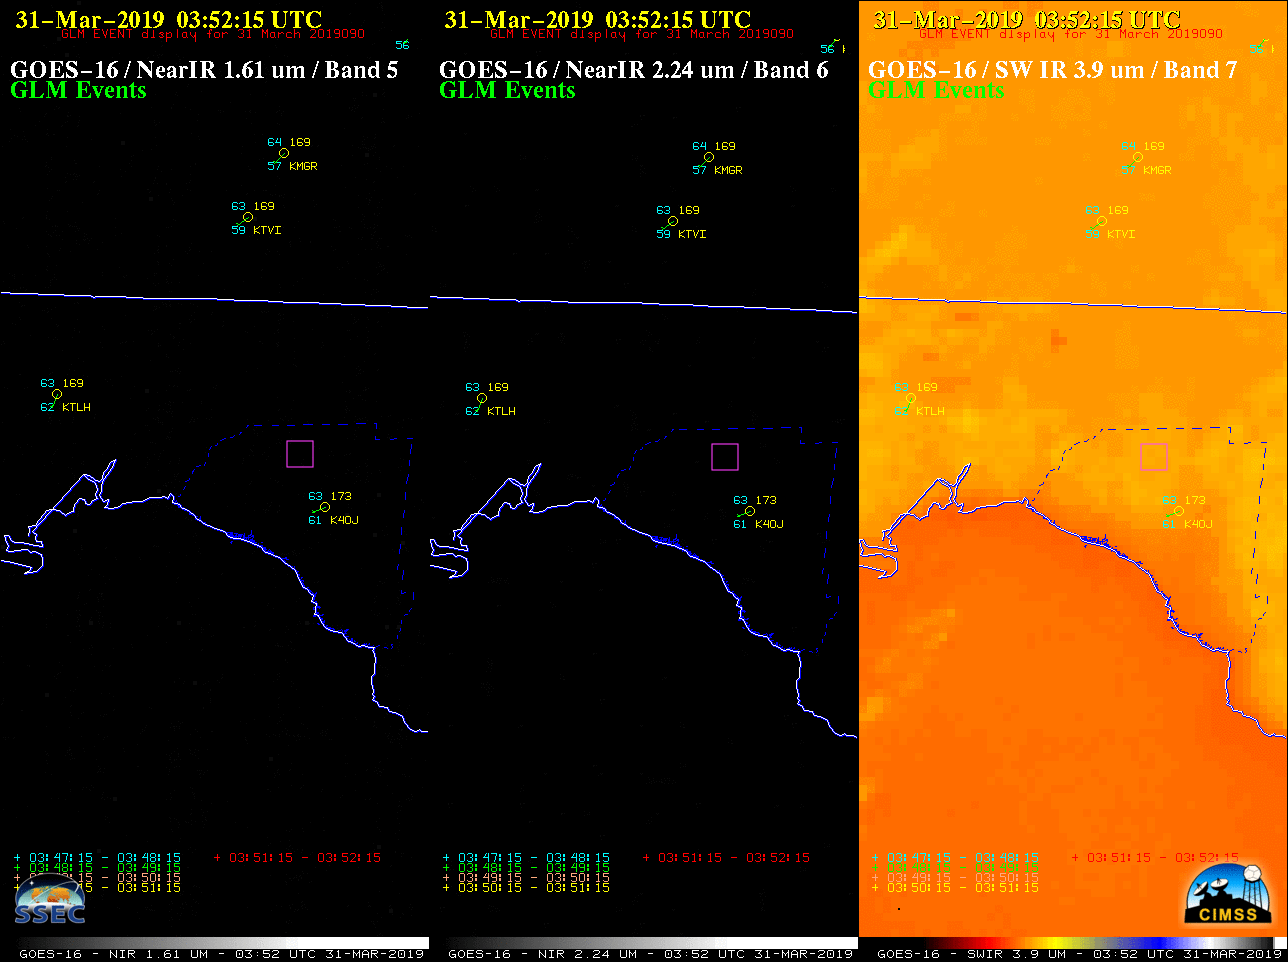 GOES-16 Near-Infrared "Snow/Ice" (1.61 µm, left), Near-Infrared "Cloud Particle Size" (2.24 µm, center) and Shortwave Infrared (3.9 µm, right) images, with 1-minute plots of GLM Events [click to enlarge]